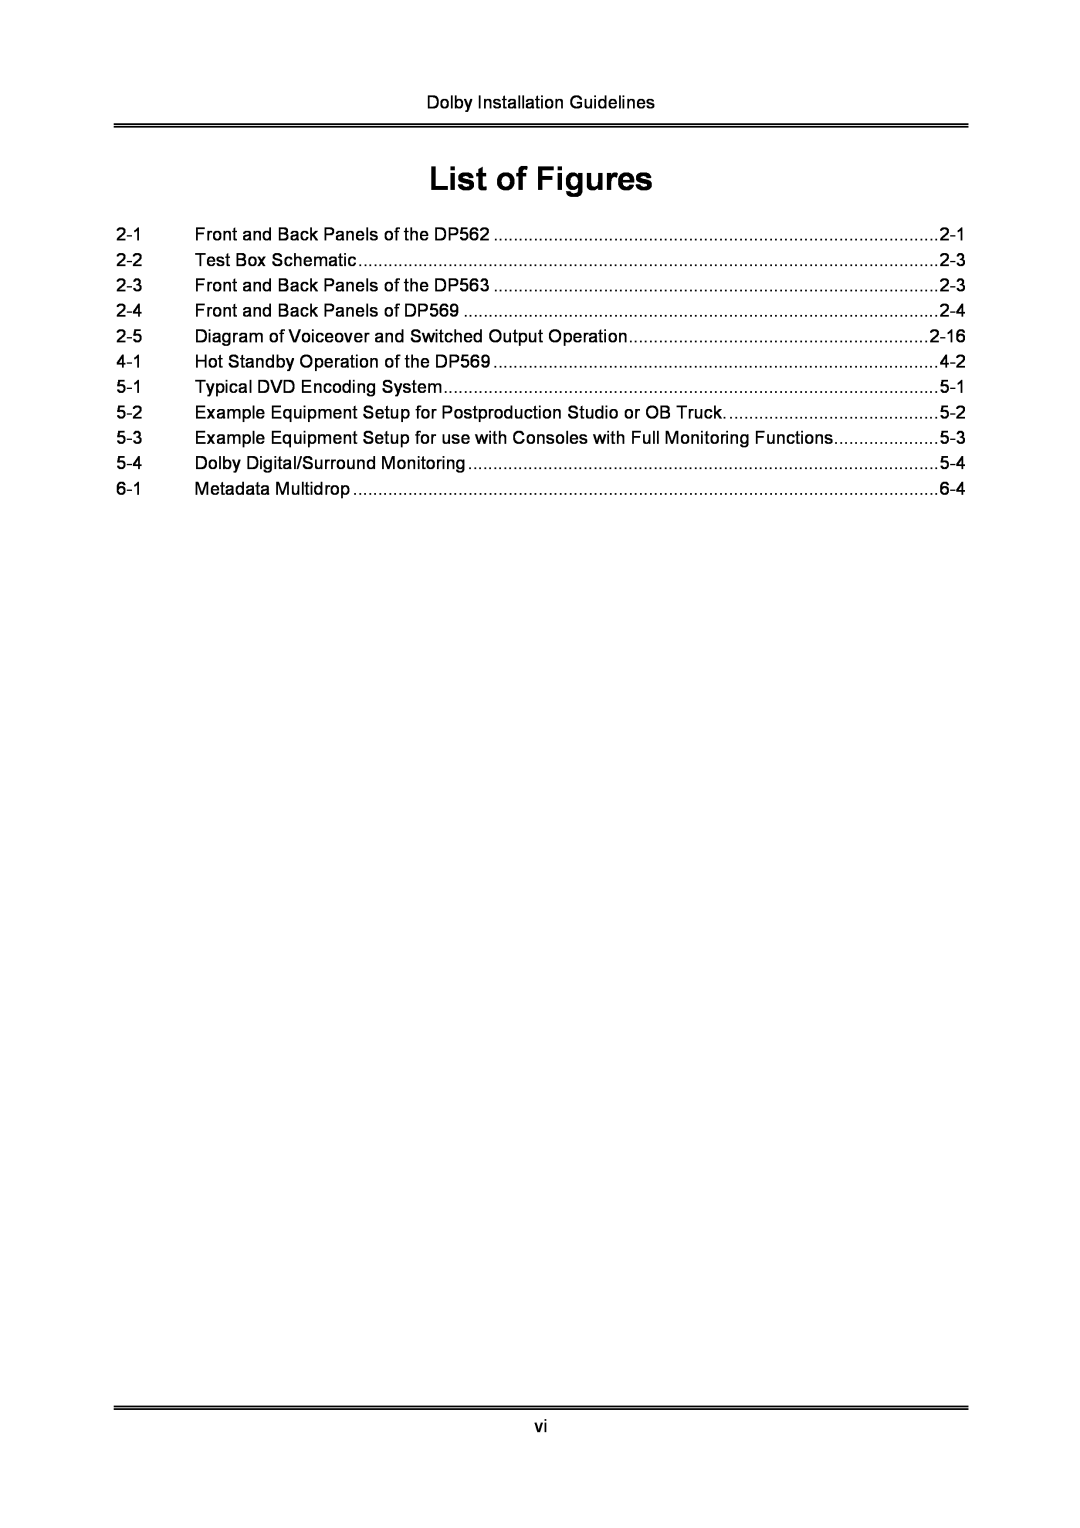 Dolby Laboratories S01/13621 manual List of Figures 